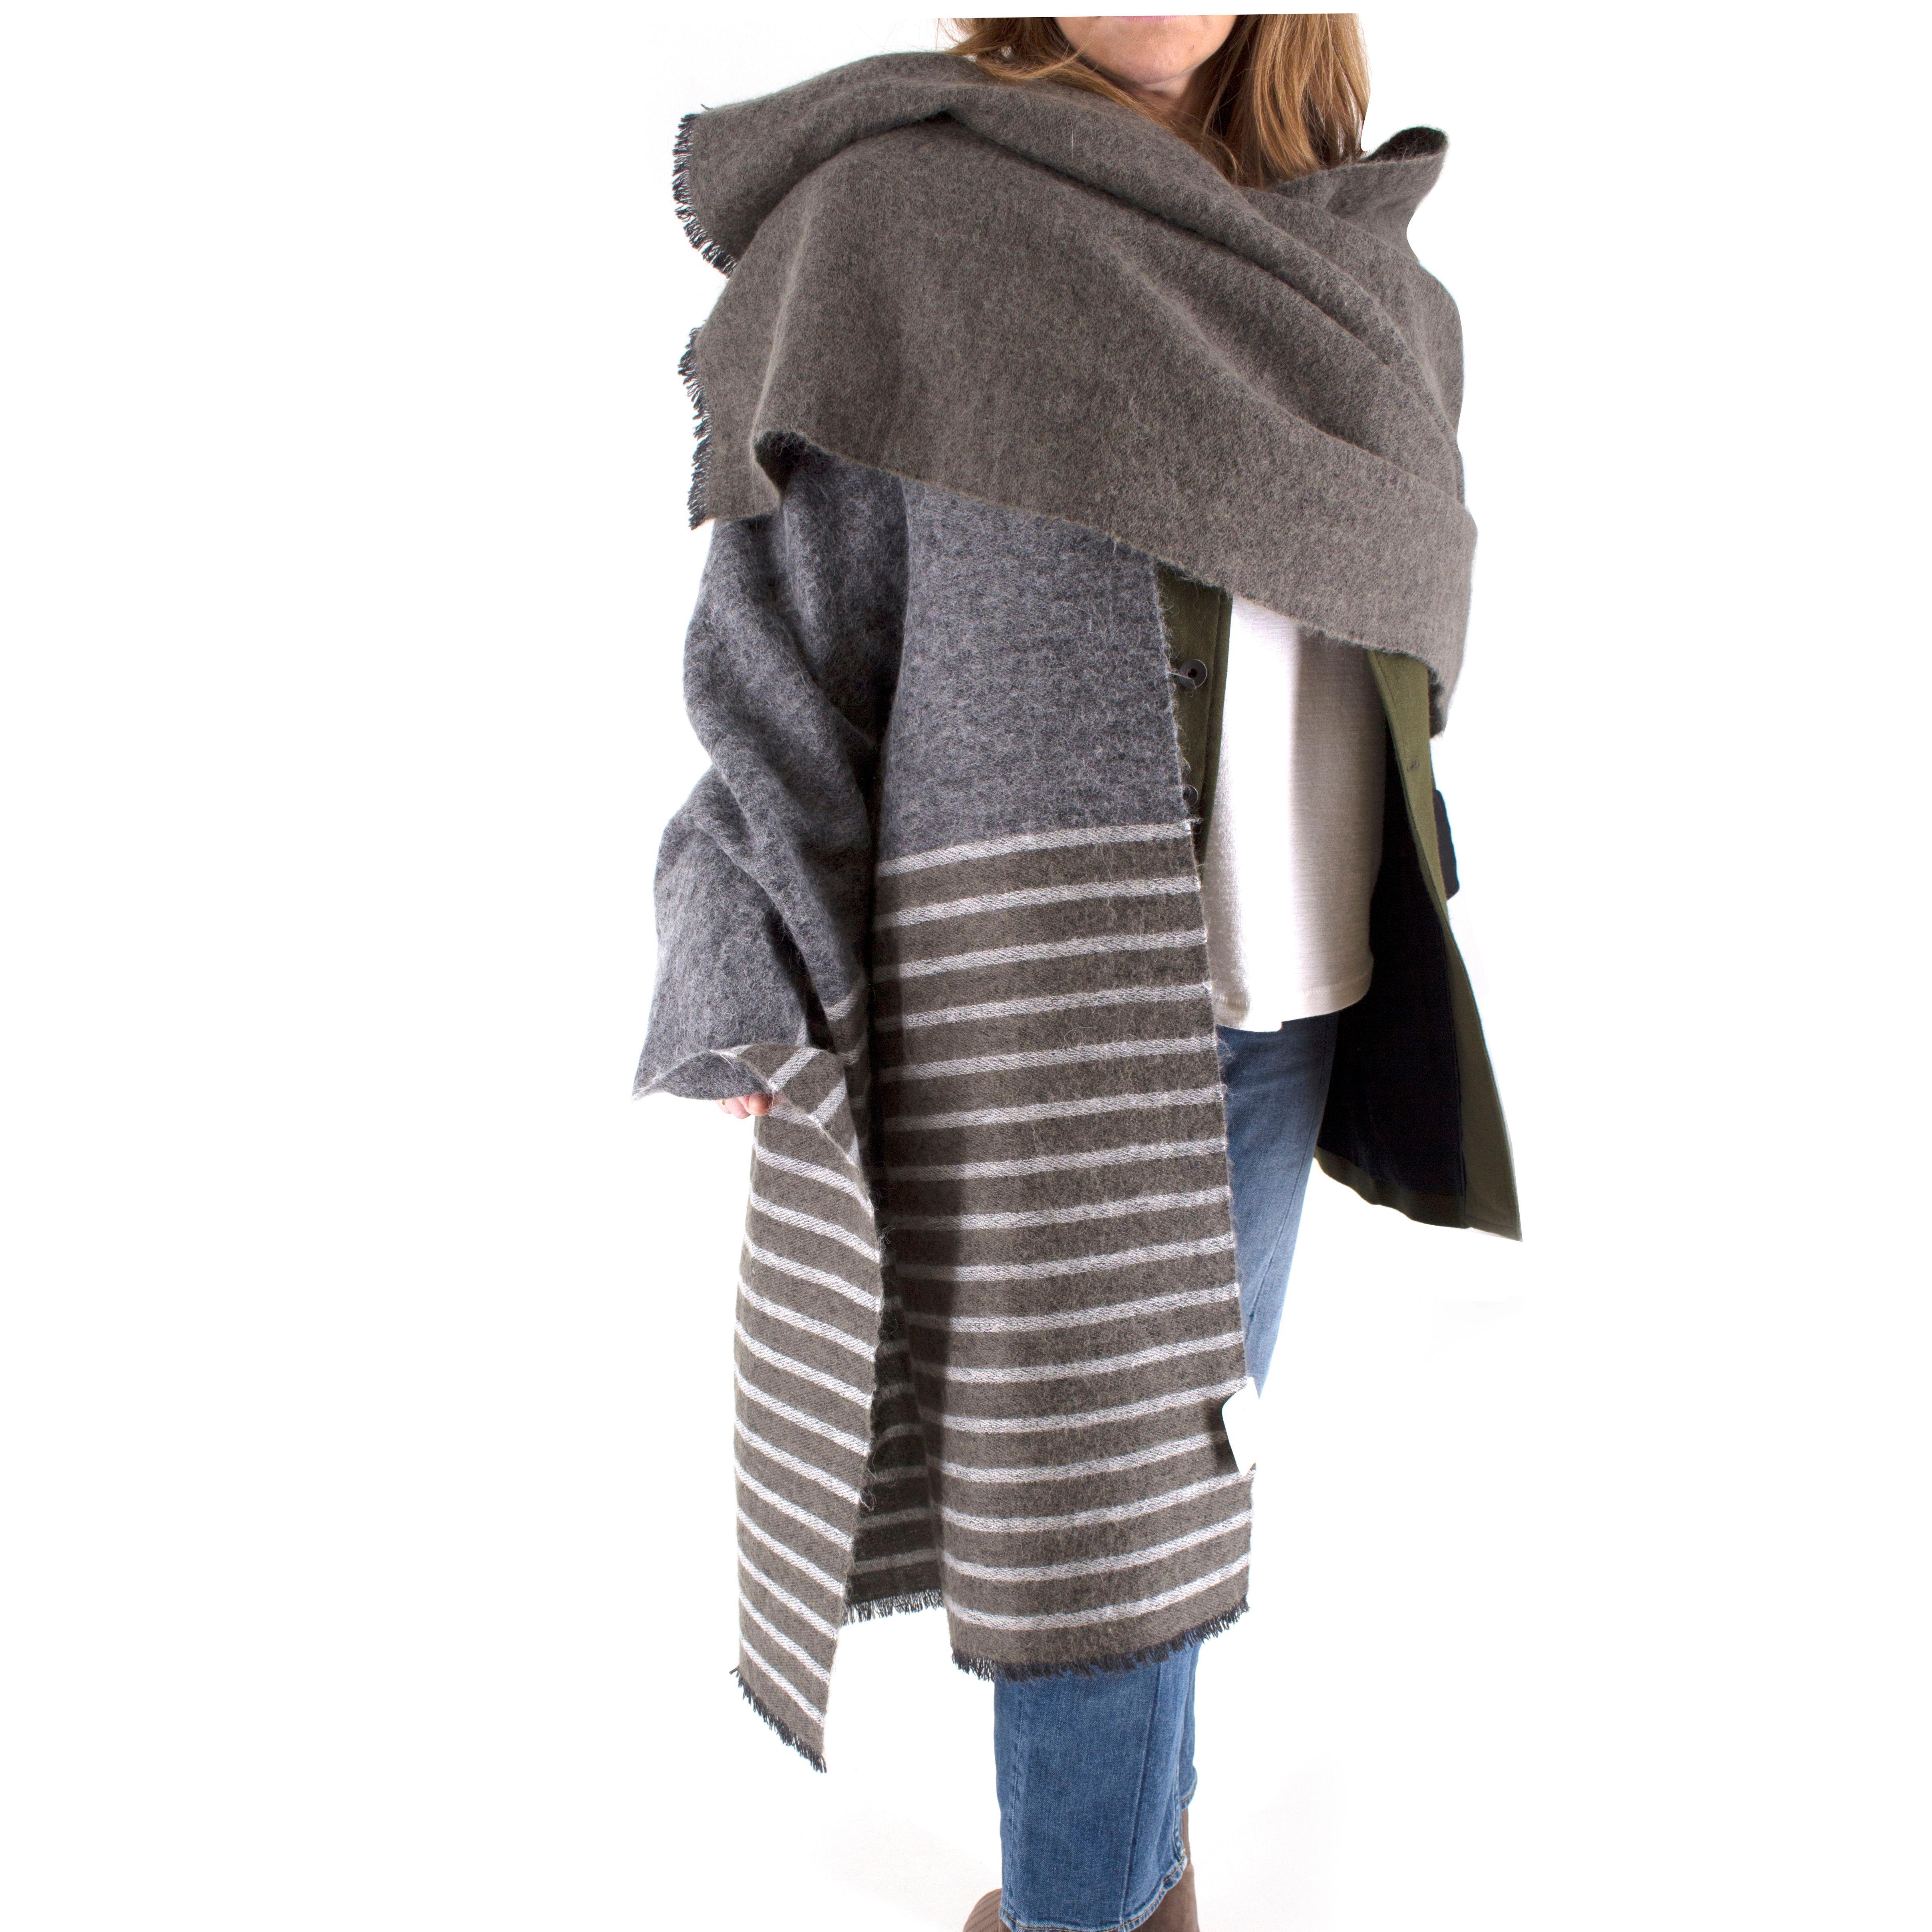 Brunello Cucinelli Grey Cashmere Striped Scarf

-Large grey scarf with light grey stripes and green accents
-Raw hem at ends
-Scarf features stripes of varied sizes 

Approx.

Length - 230cm
Width - 72cm

Cashmere, Mohair, Alpaca and Polyamide